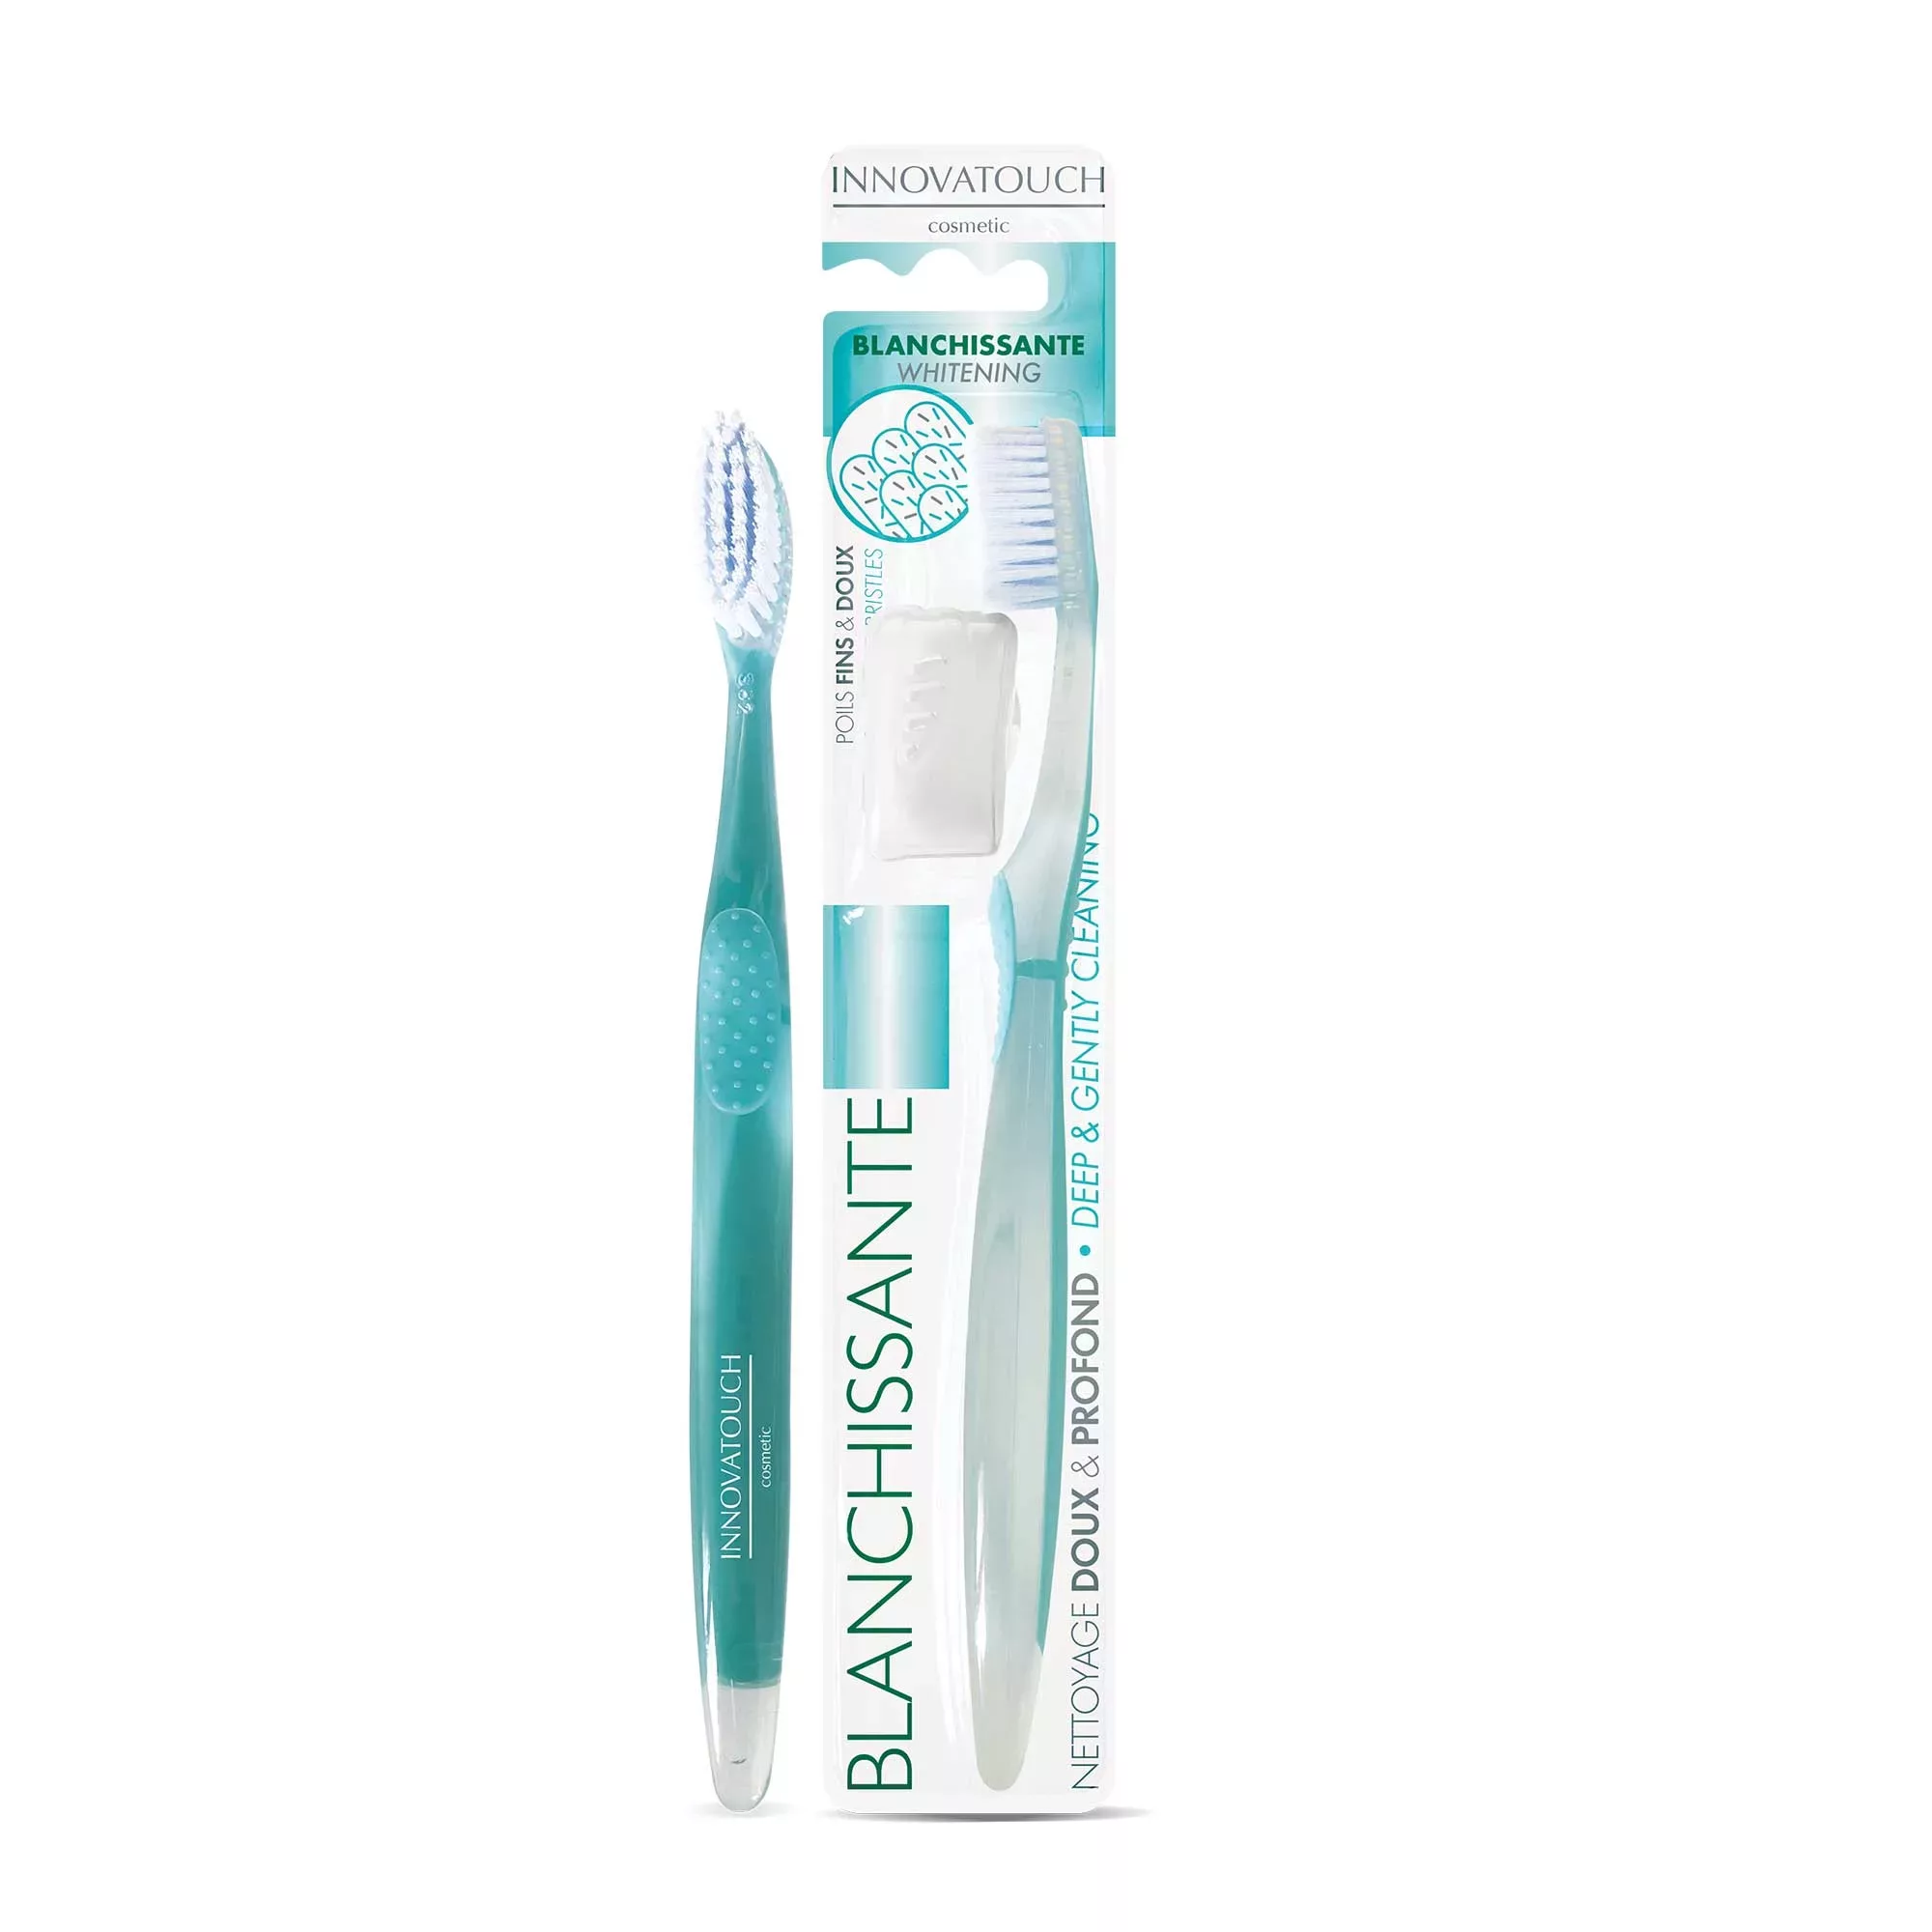 Brosse à dents blanchissante innovatouch cosmetic